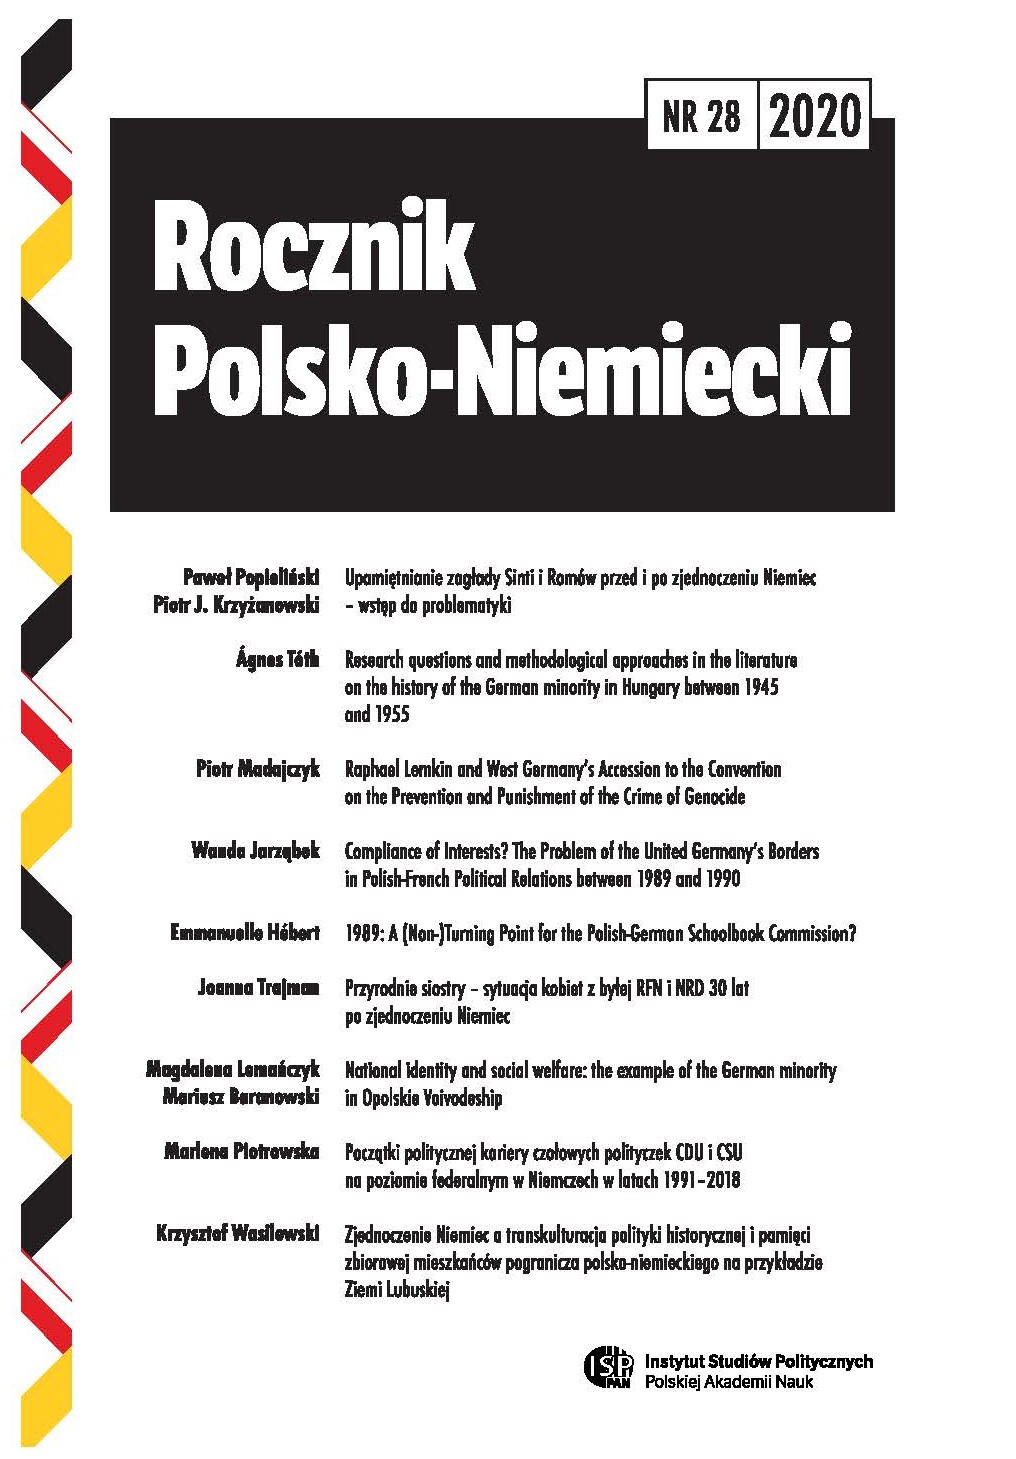 The Political Activity of Poland’s German Minority During the 2019 National Election Campaign Cover Image